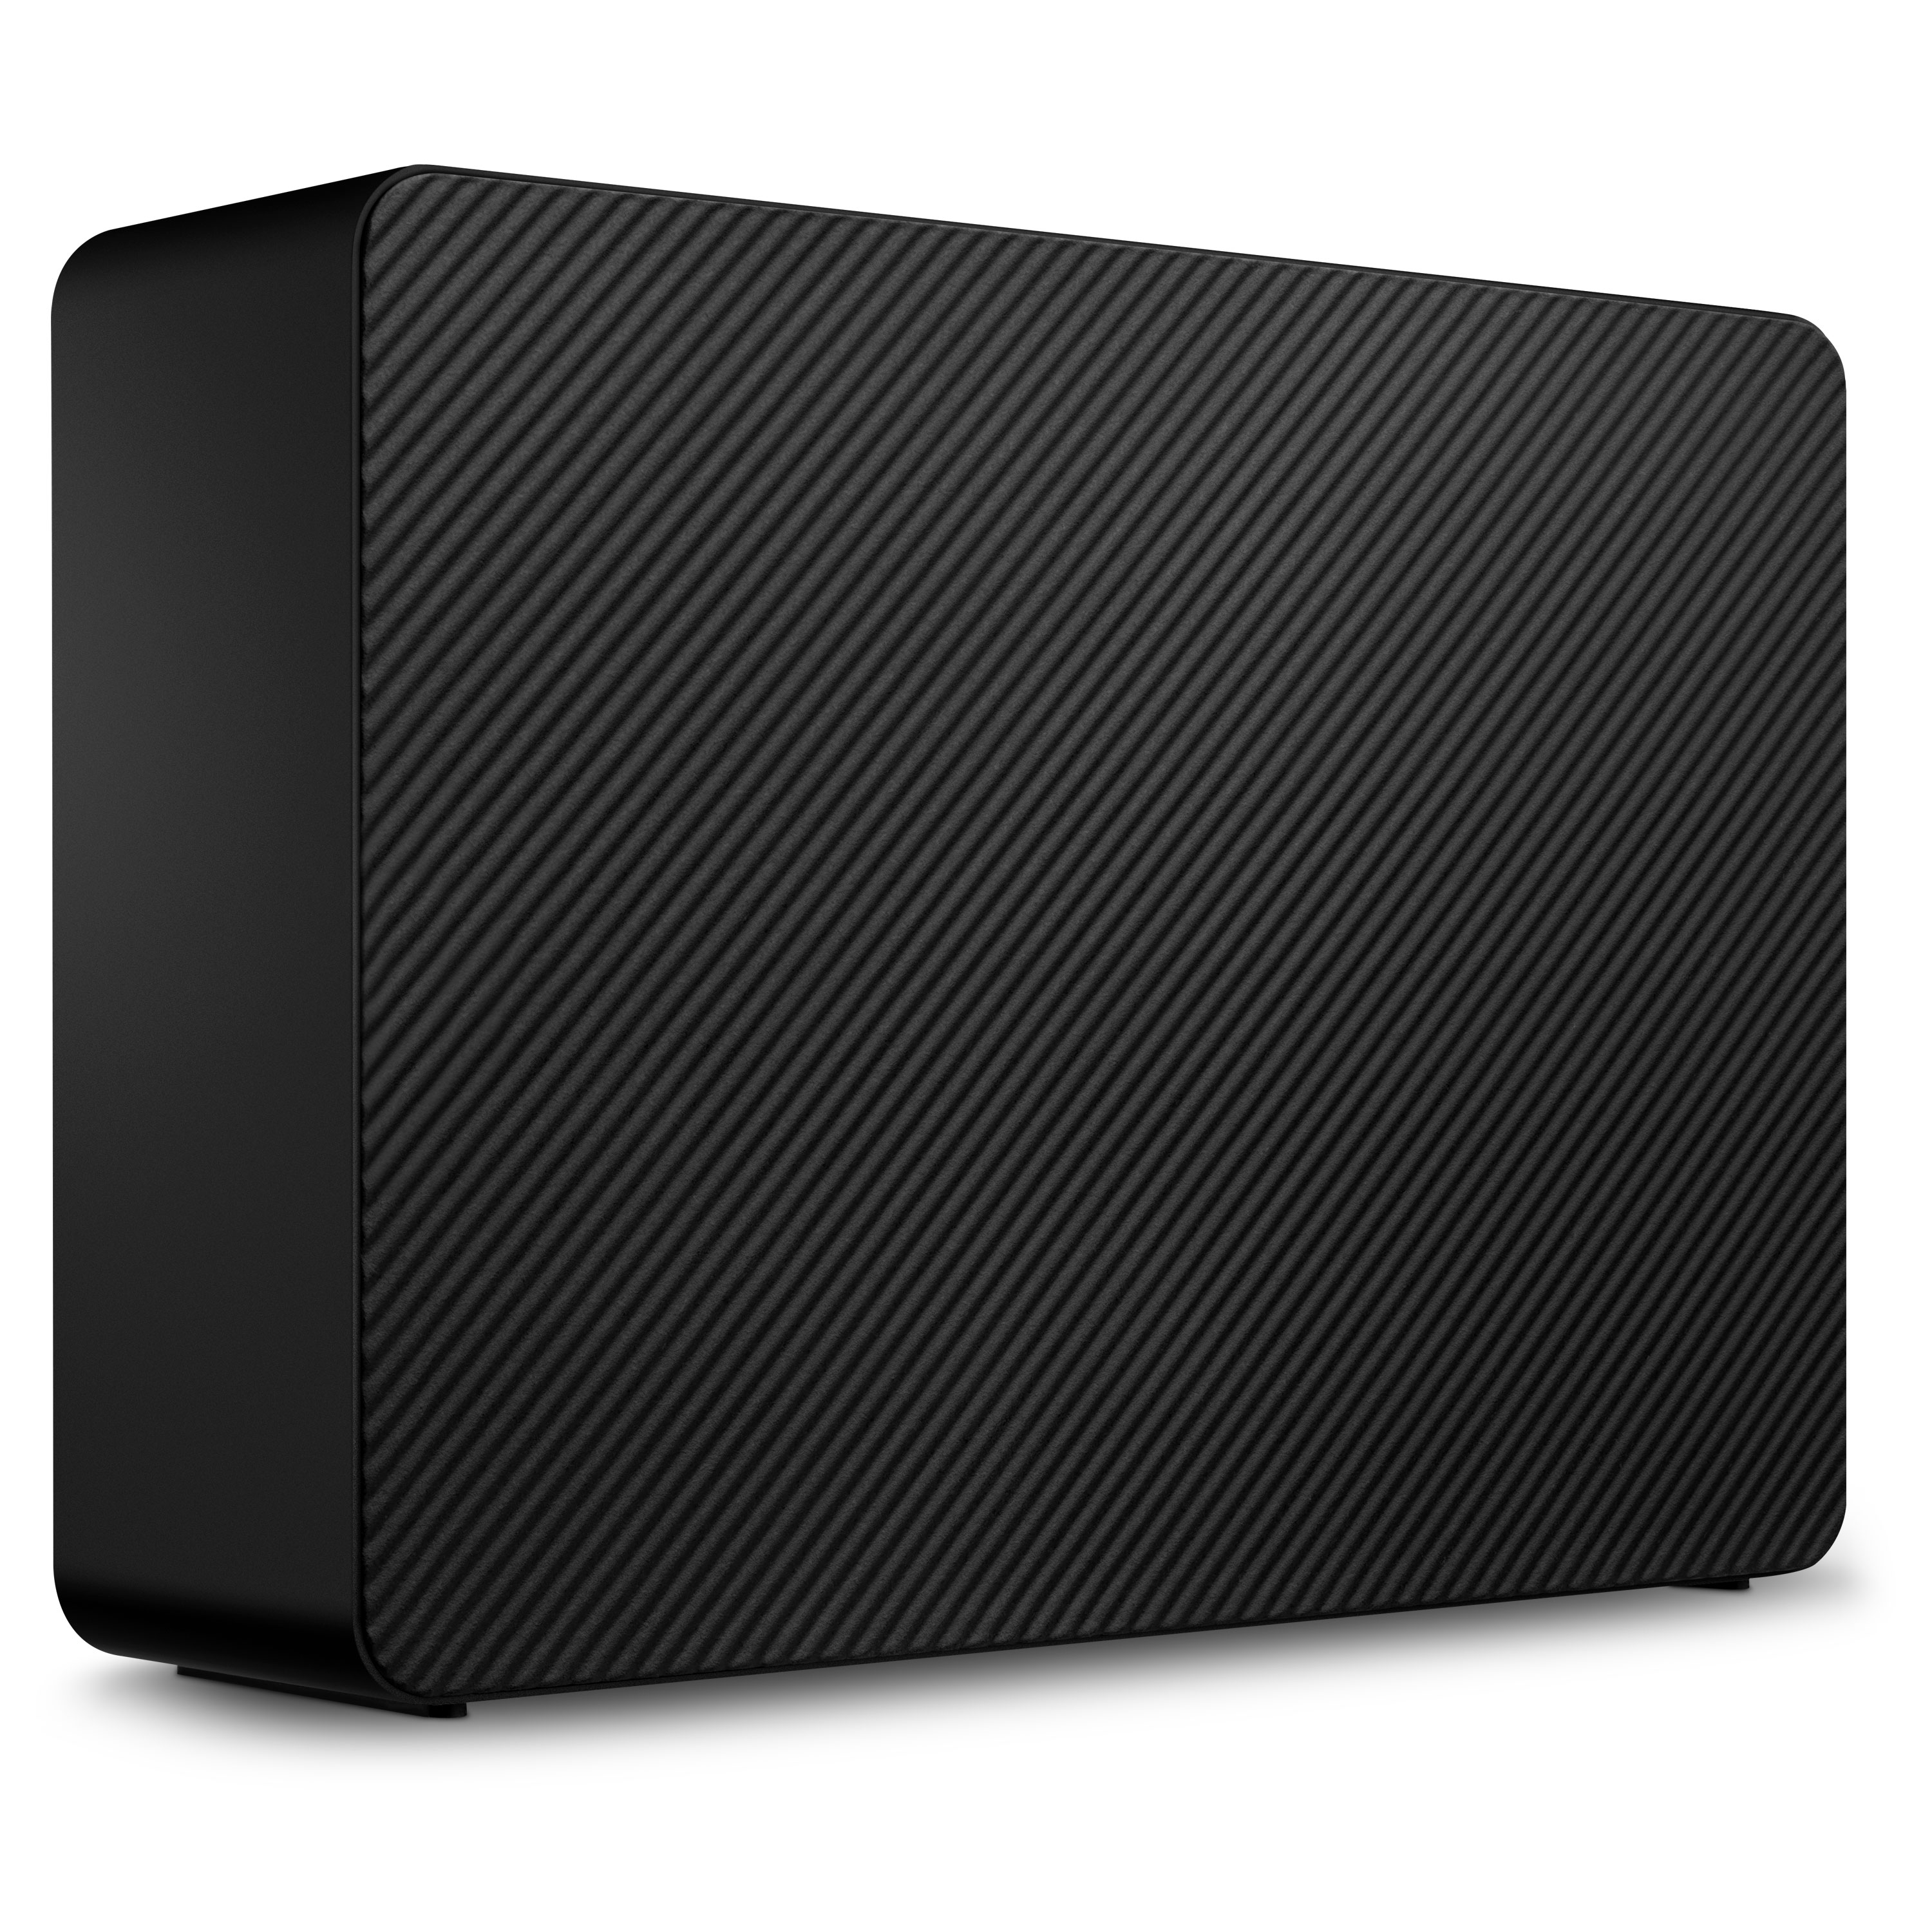 Seagate ExpansionPLUS 8TB External Hard Drive - USB 3.0 with Rescue Data Recovery (STKR8000400) - image 4 of 7